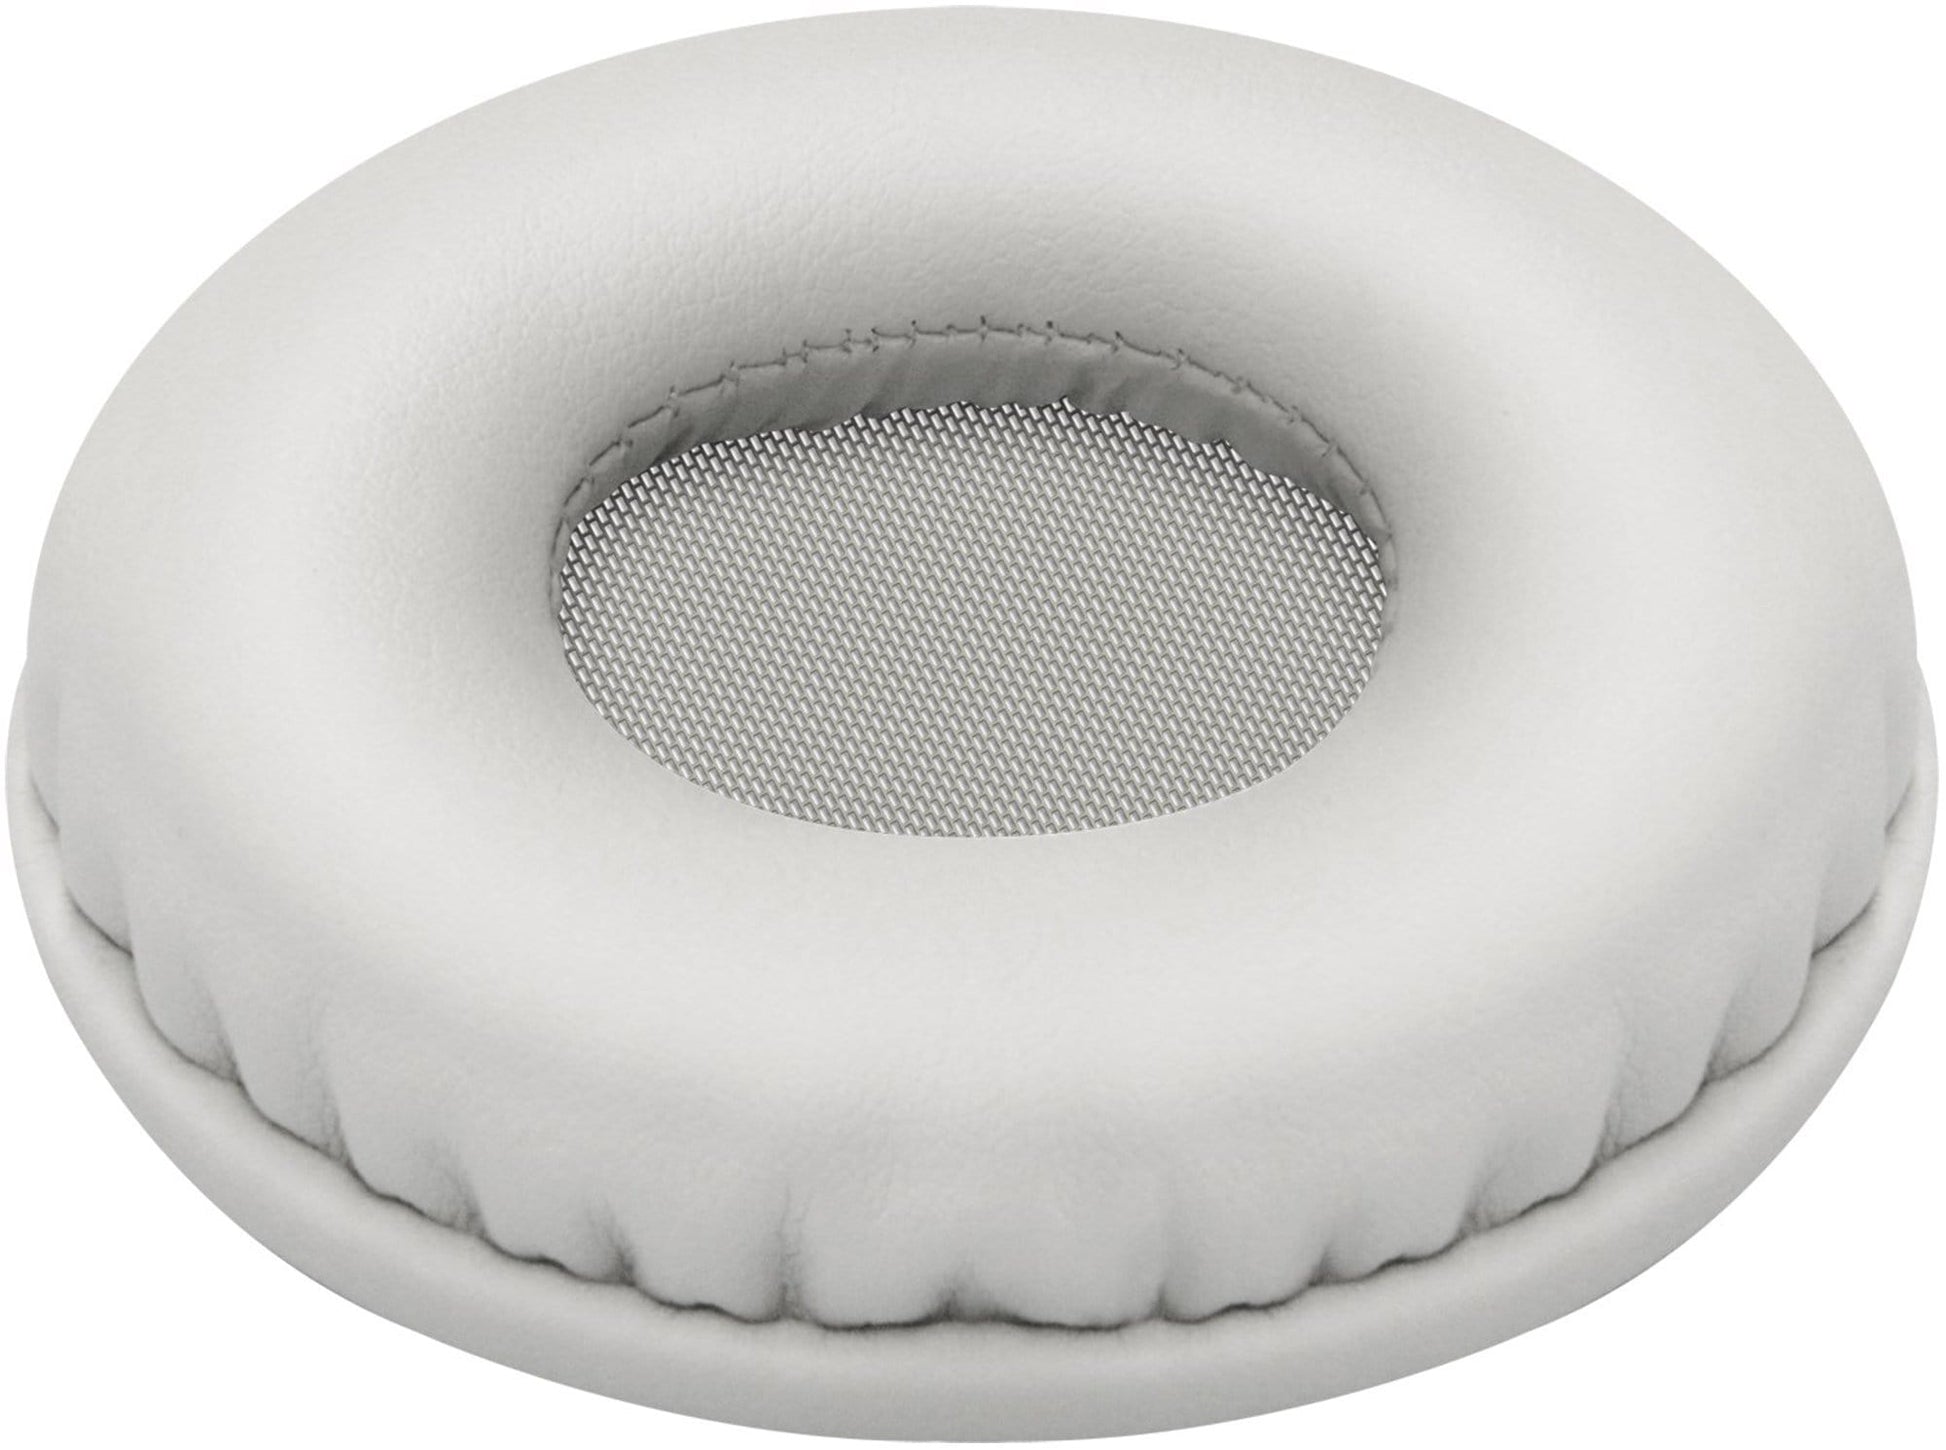 Pioneer HDJ-S7-W Replacement Ear Pad - White - ProSound and Stage Lighting